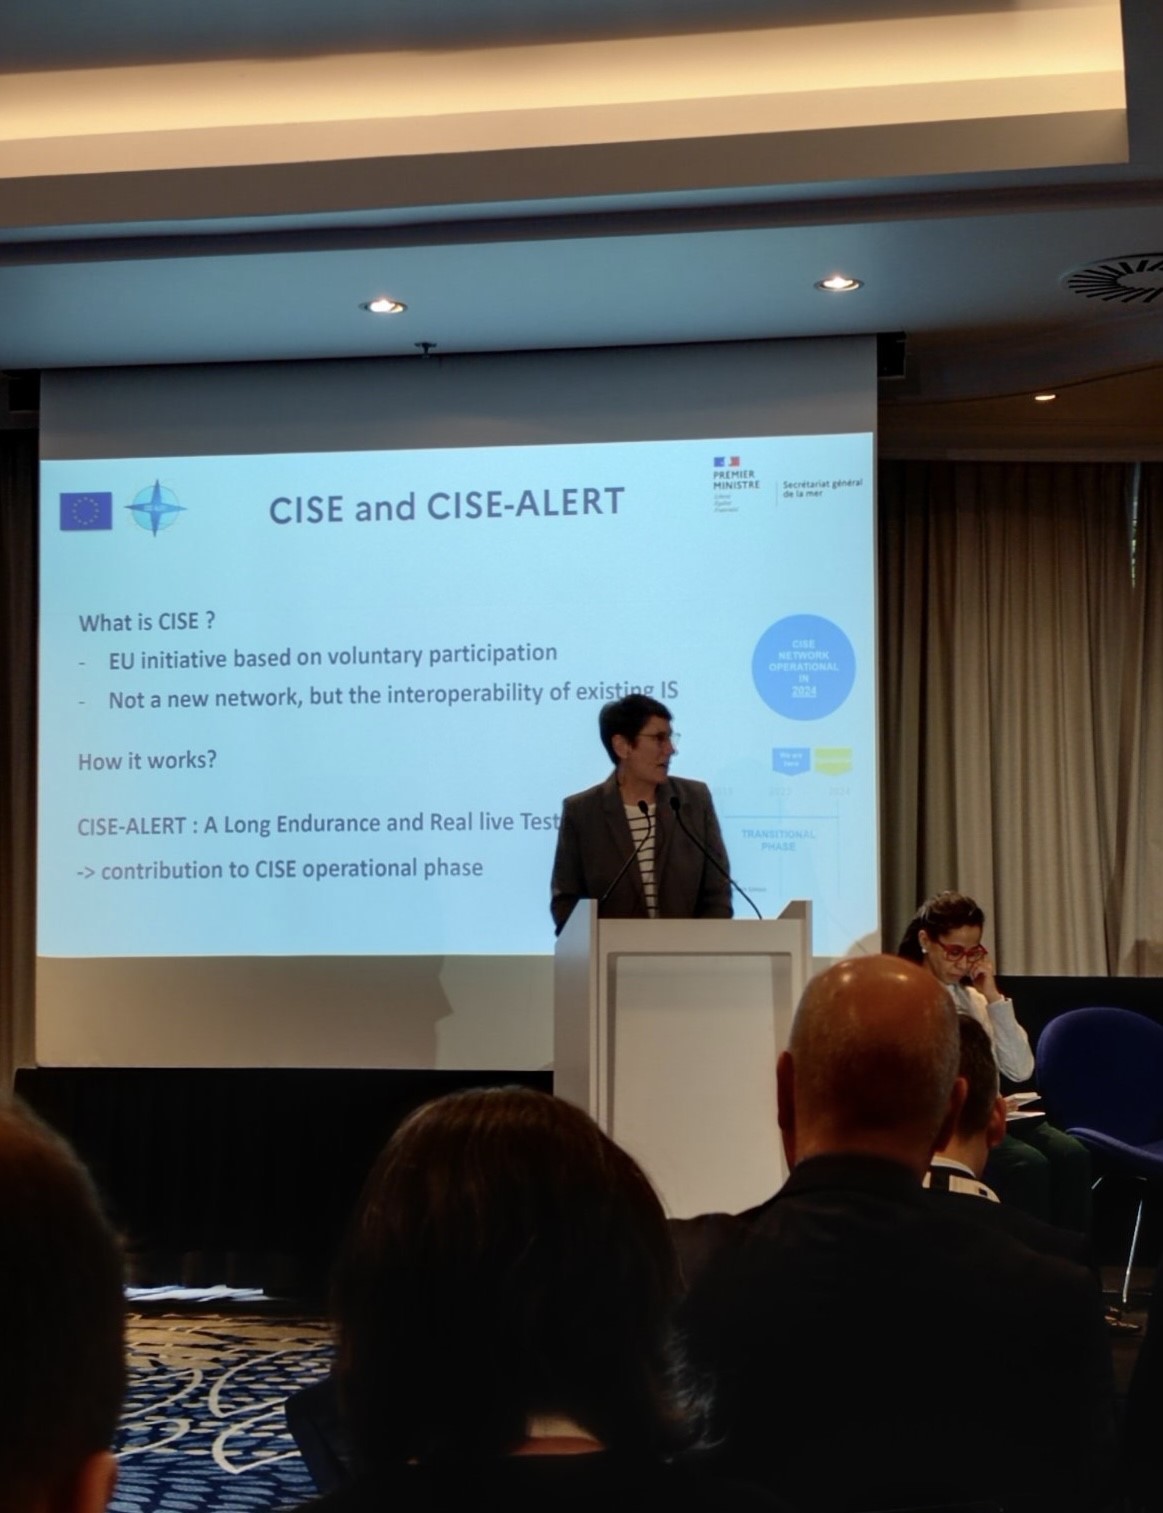 CISE-ALERT project presented during CERIS thematic Workshop on Innovation for maritime situational awareness and maritime security